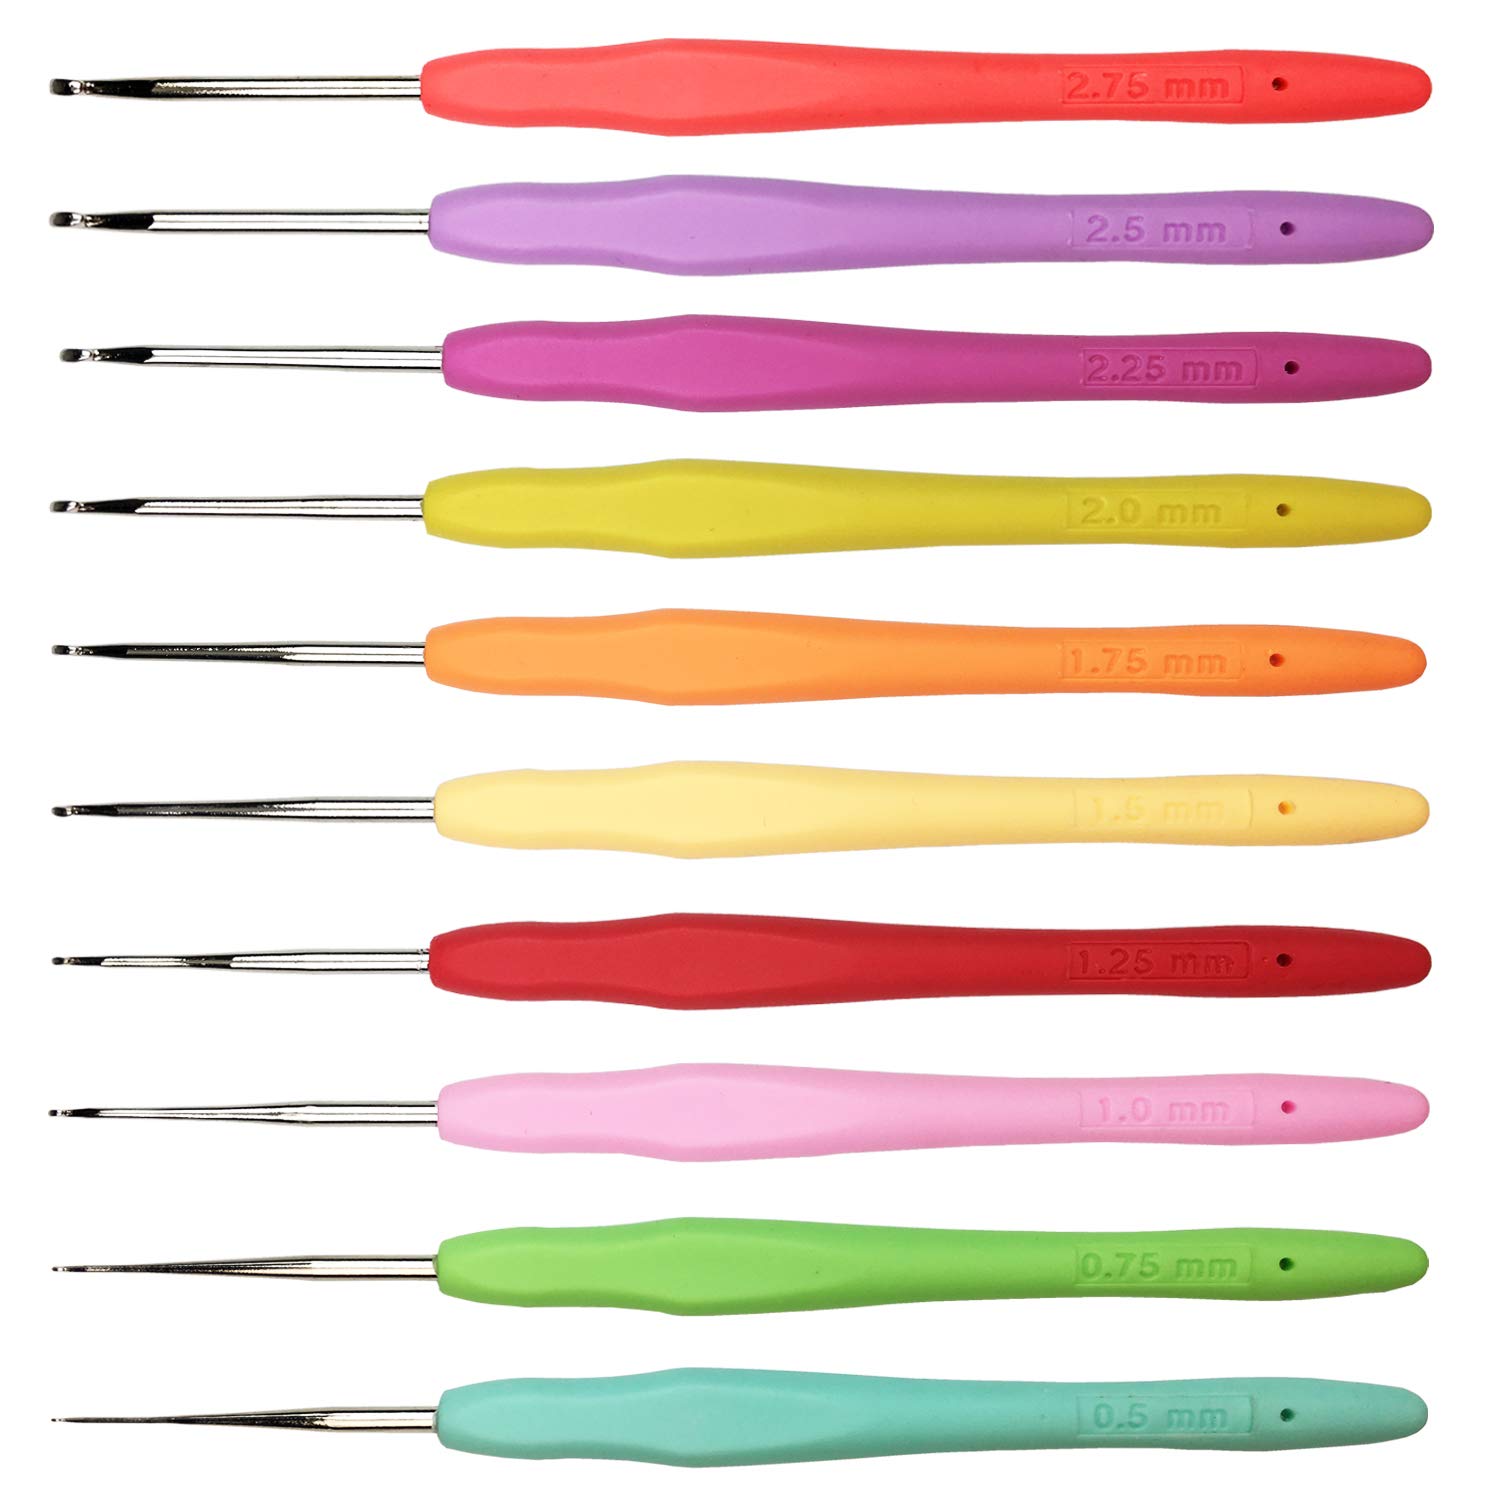 Steel Crochet Hooks with Wooden Handle Set Gift Case 10 Sizes, 0.5